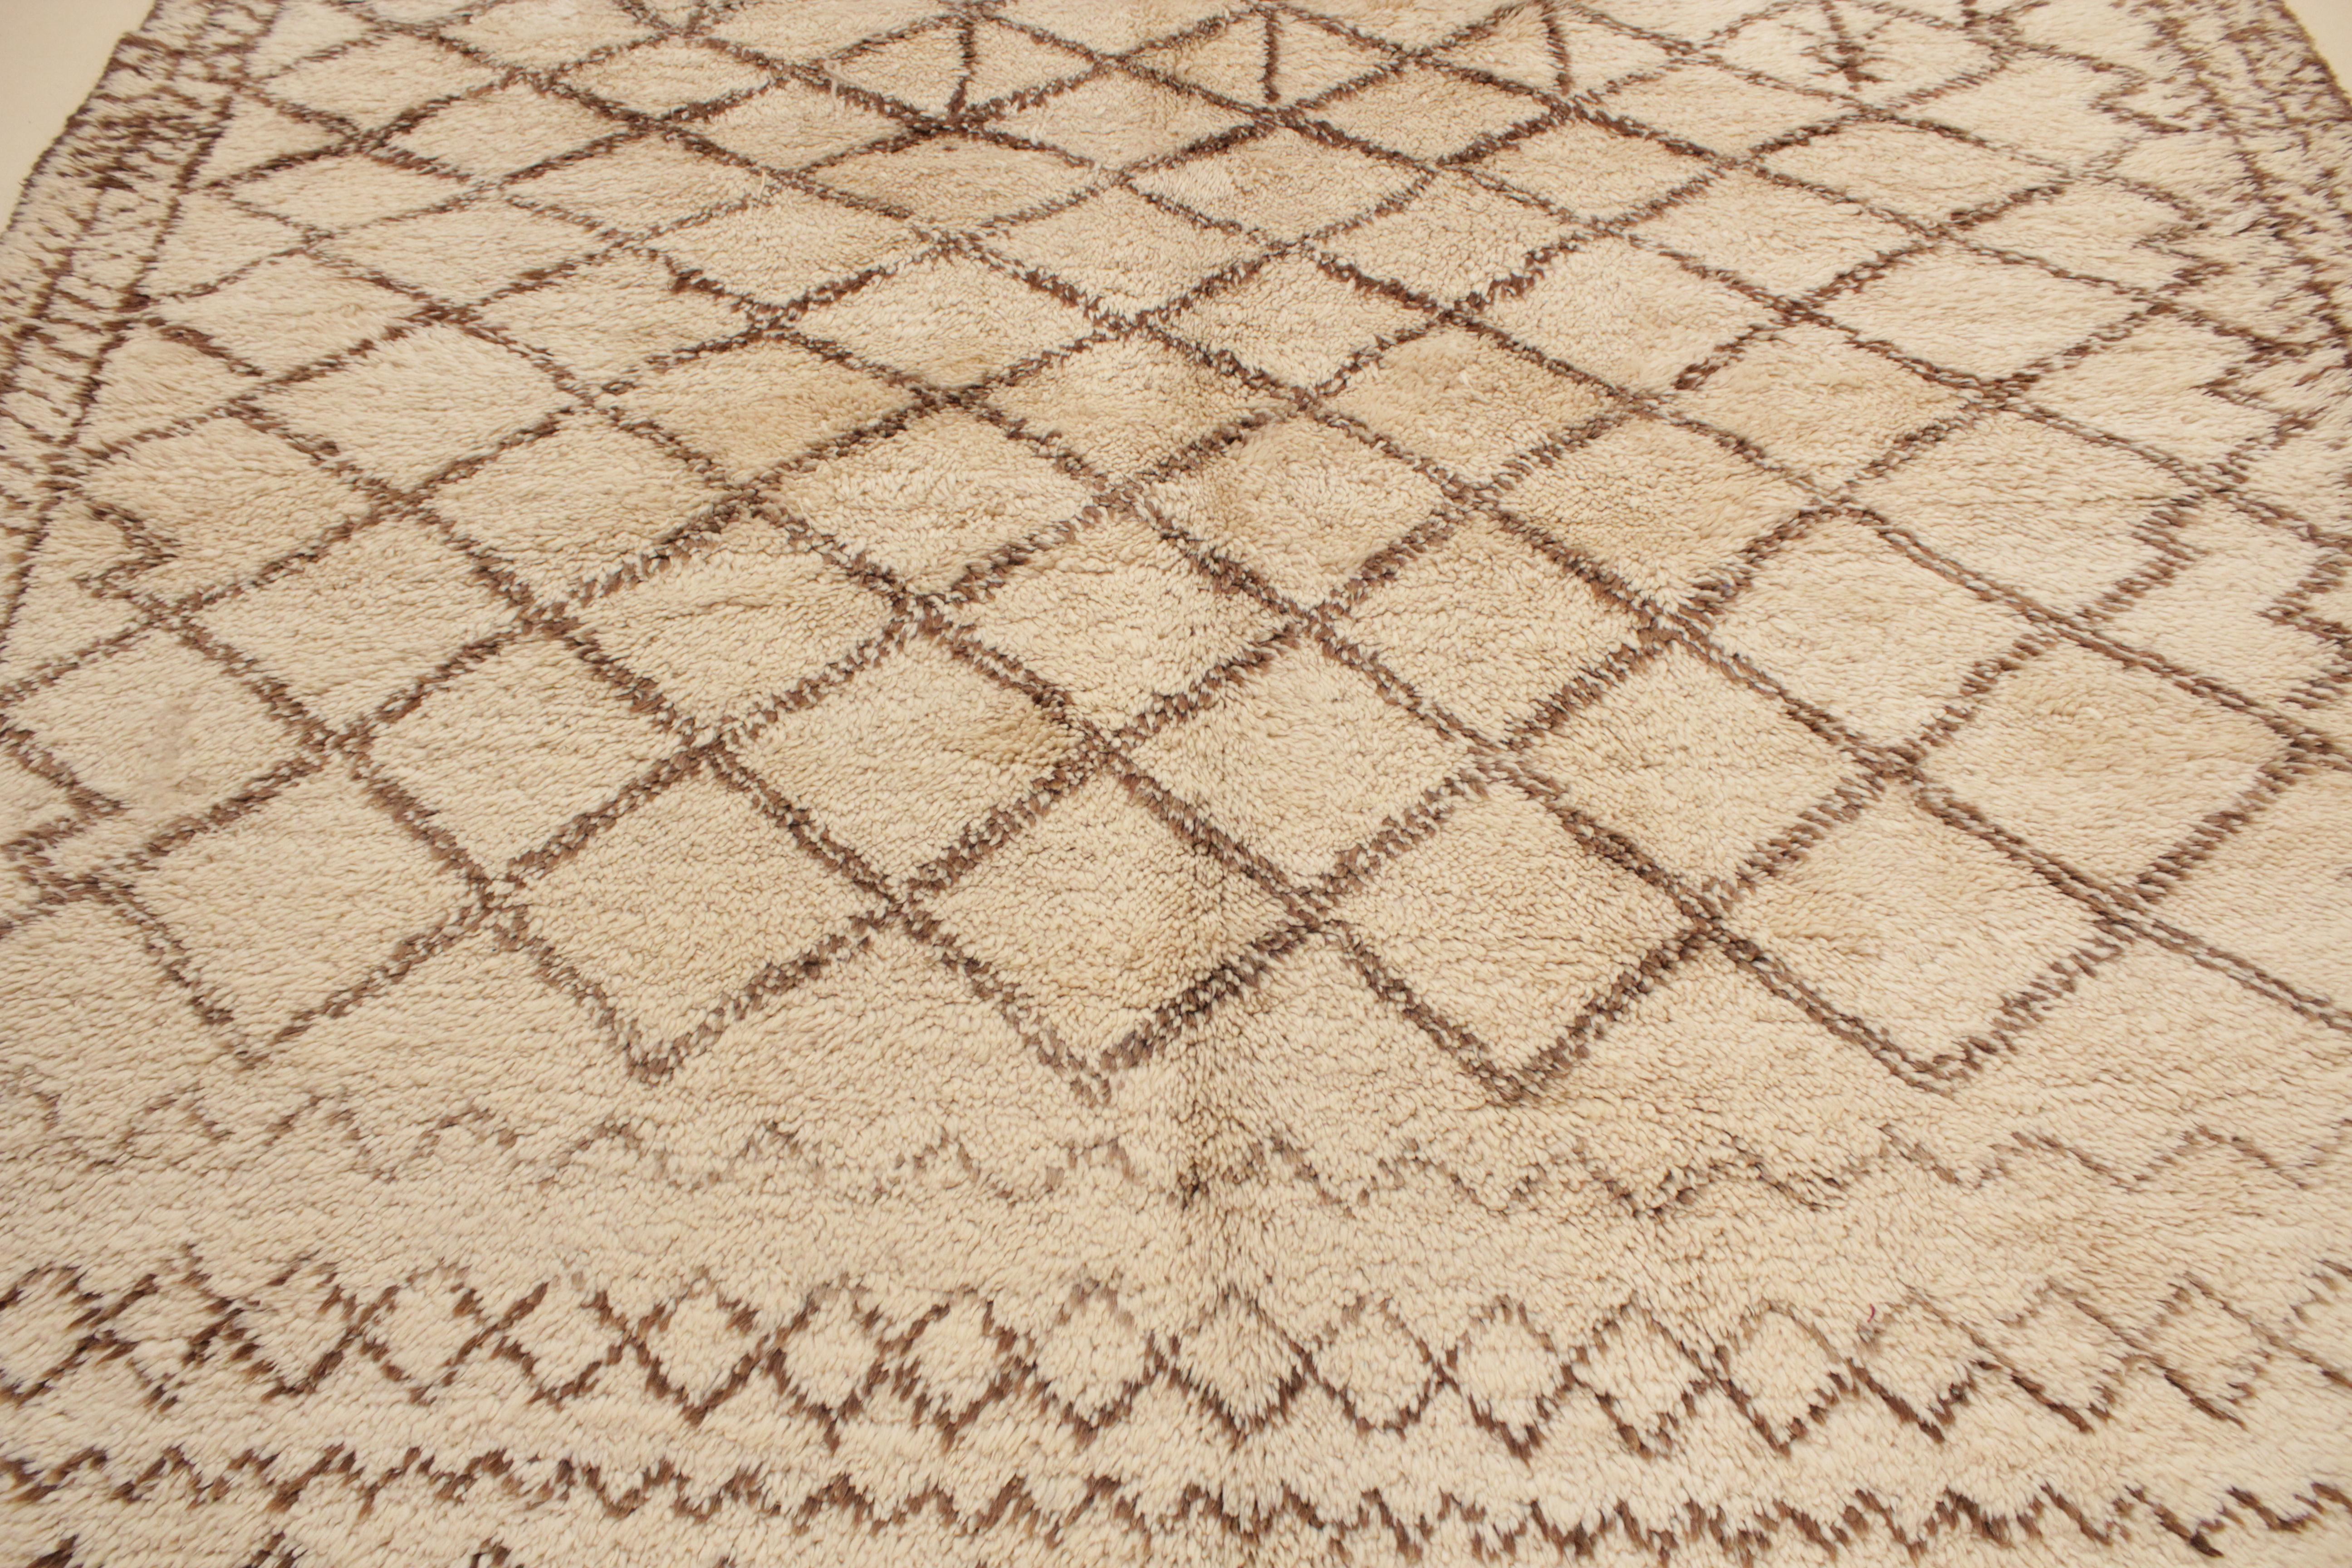 Mid-20th Century Vintage Moroccan Berber Beni Ouarain Rug in White/Mocha and Rare Size For Sale